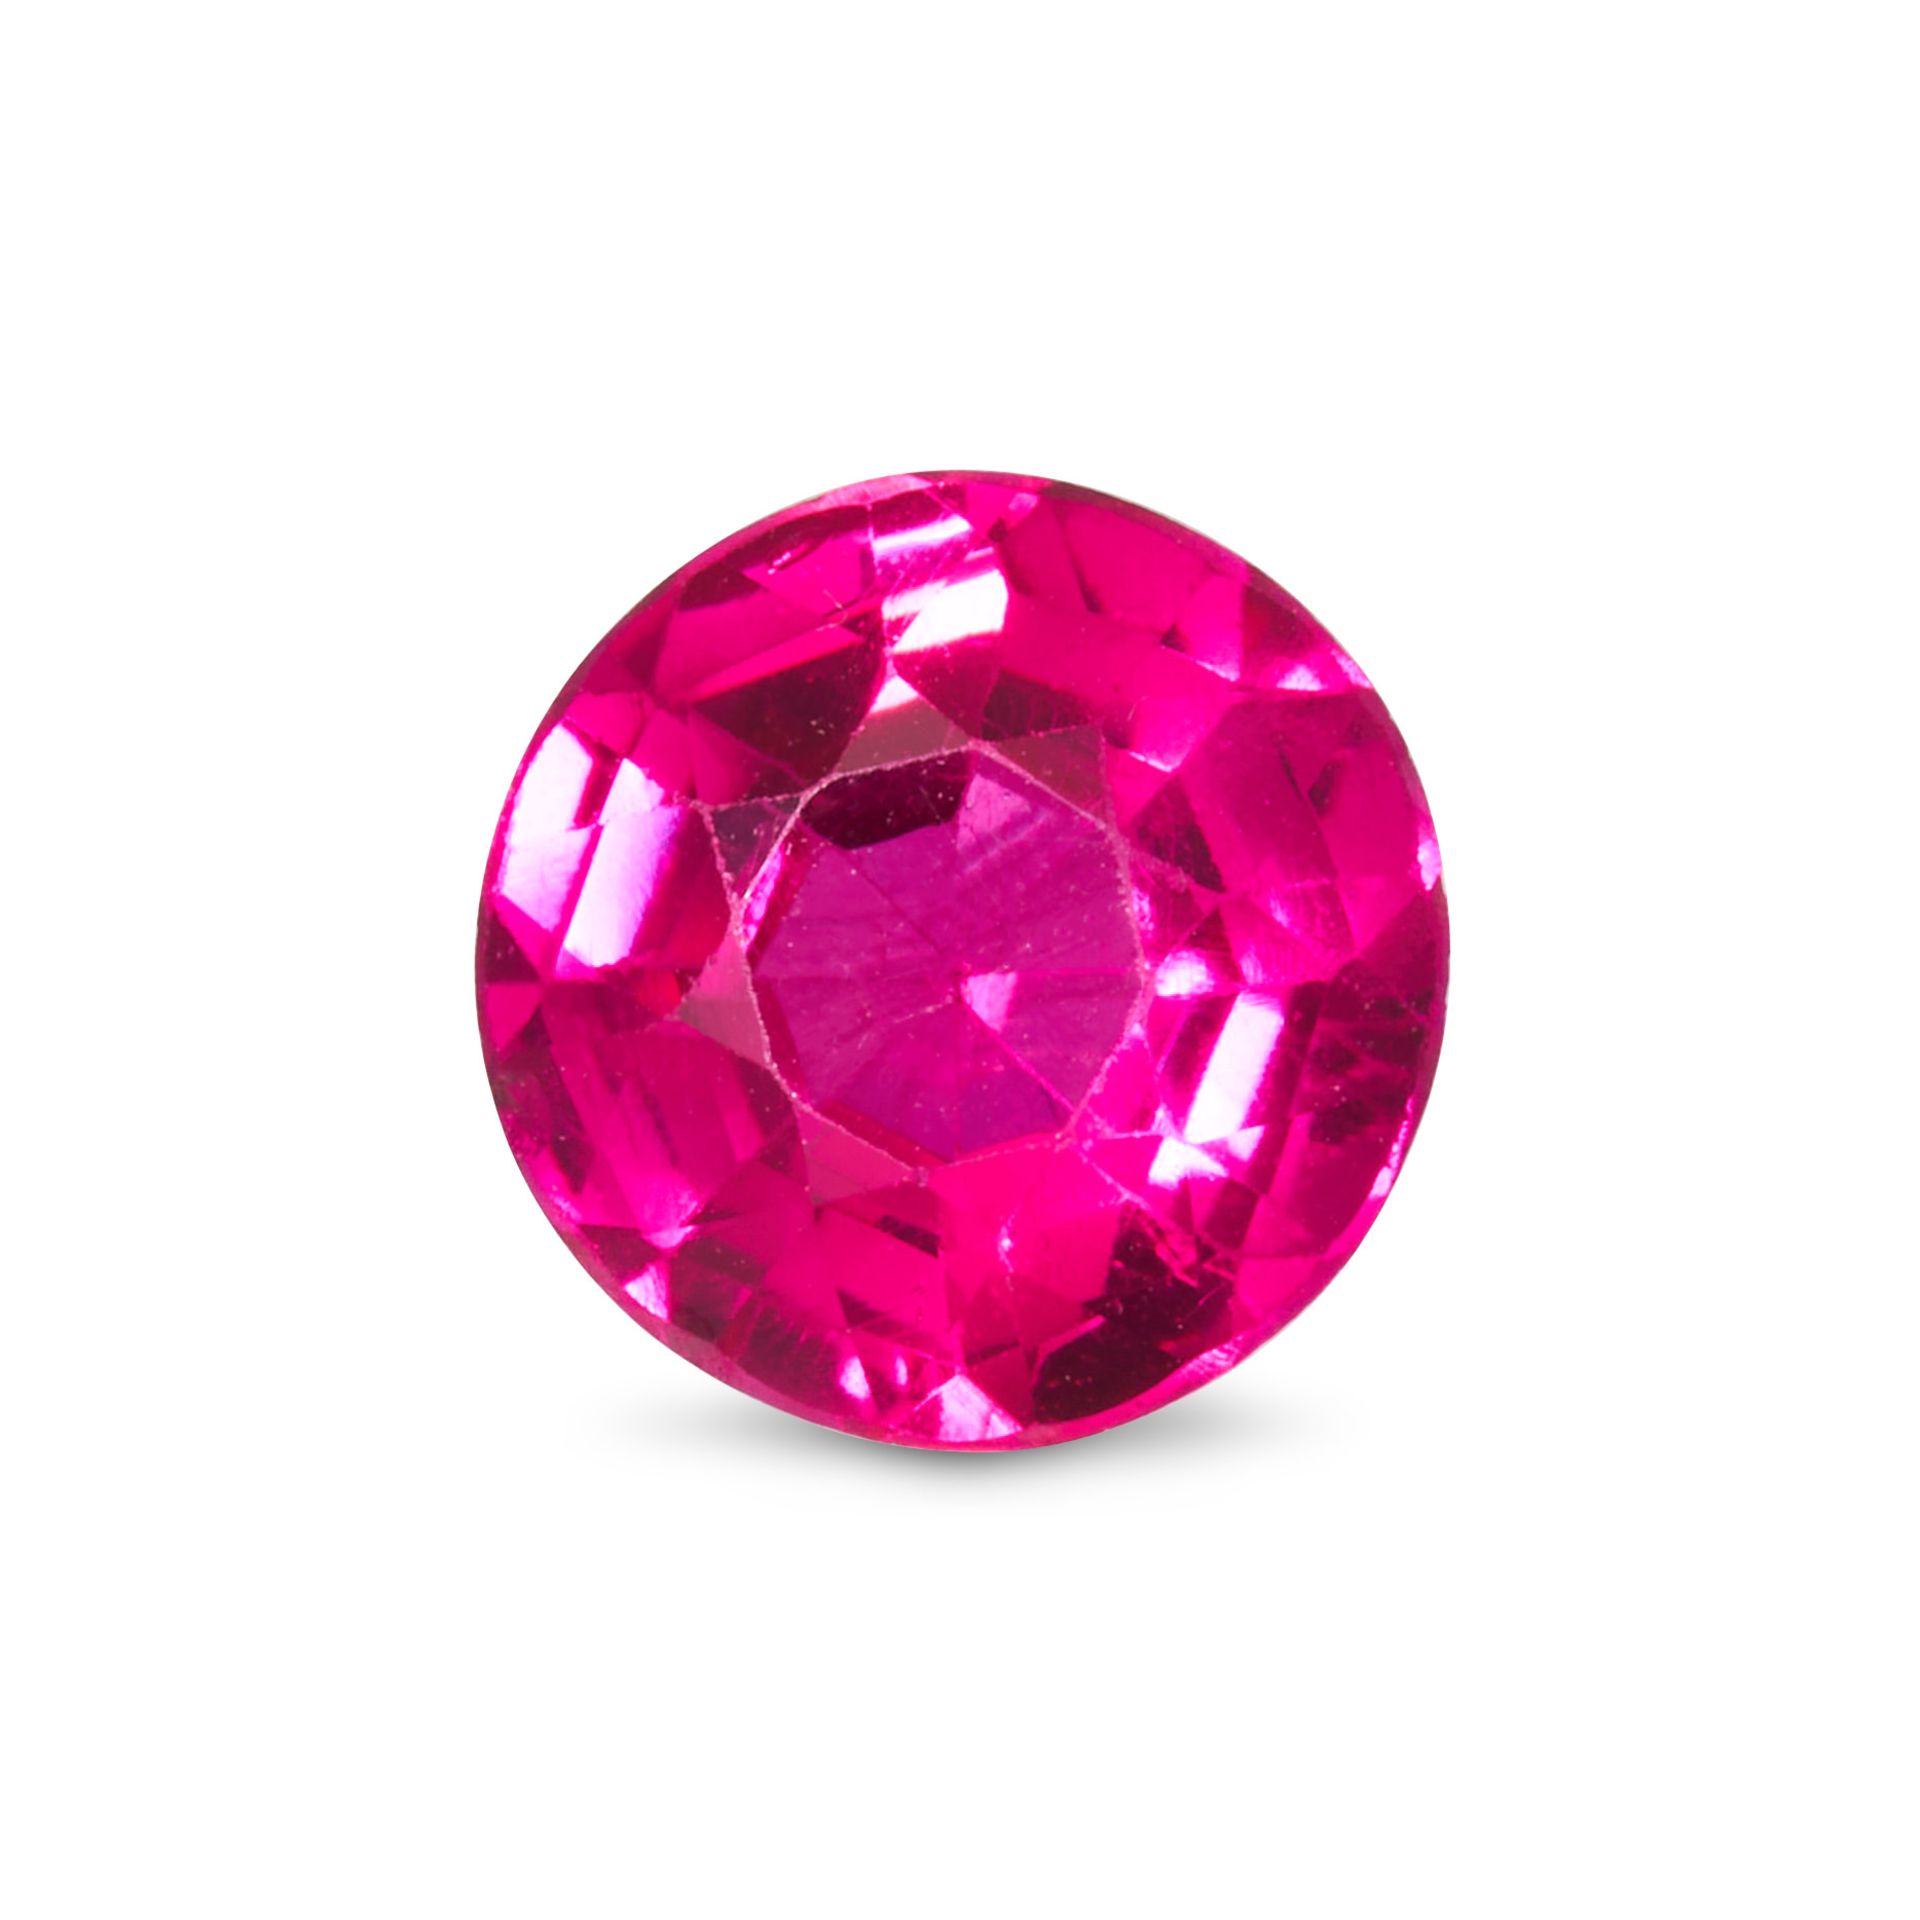 AN UNMOUNTED SYNTHETIC RUBY round cut, 2.50 carats.